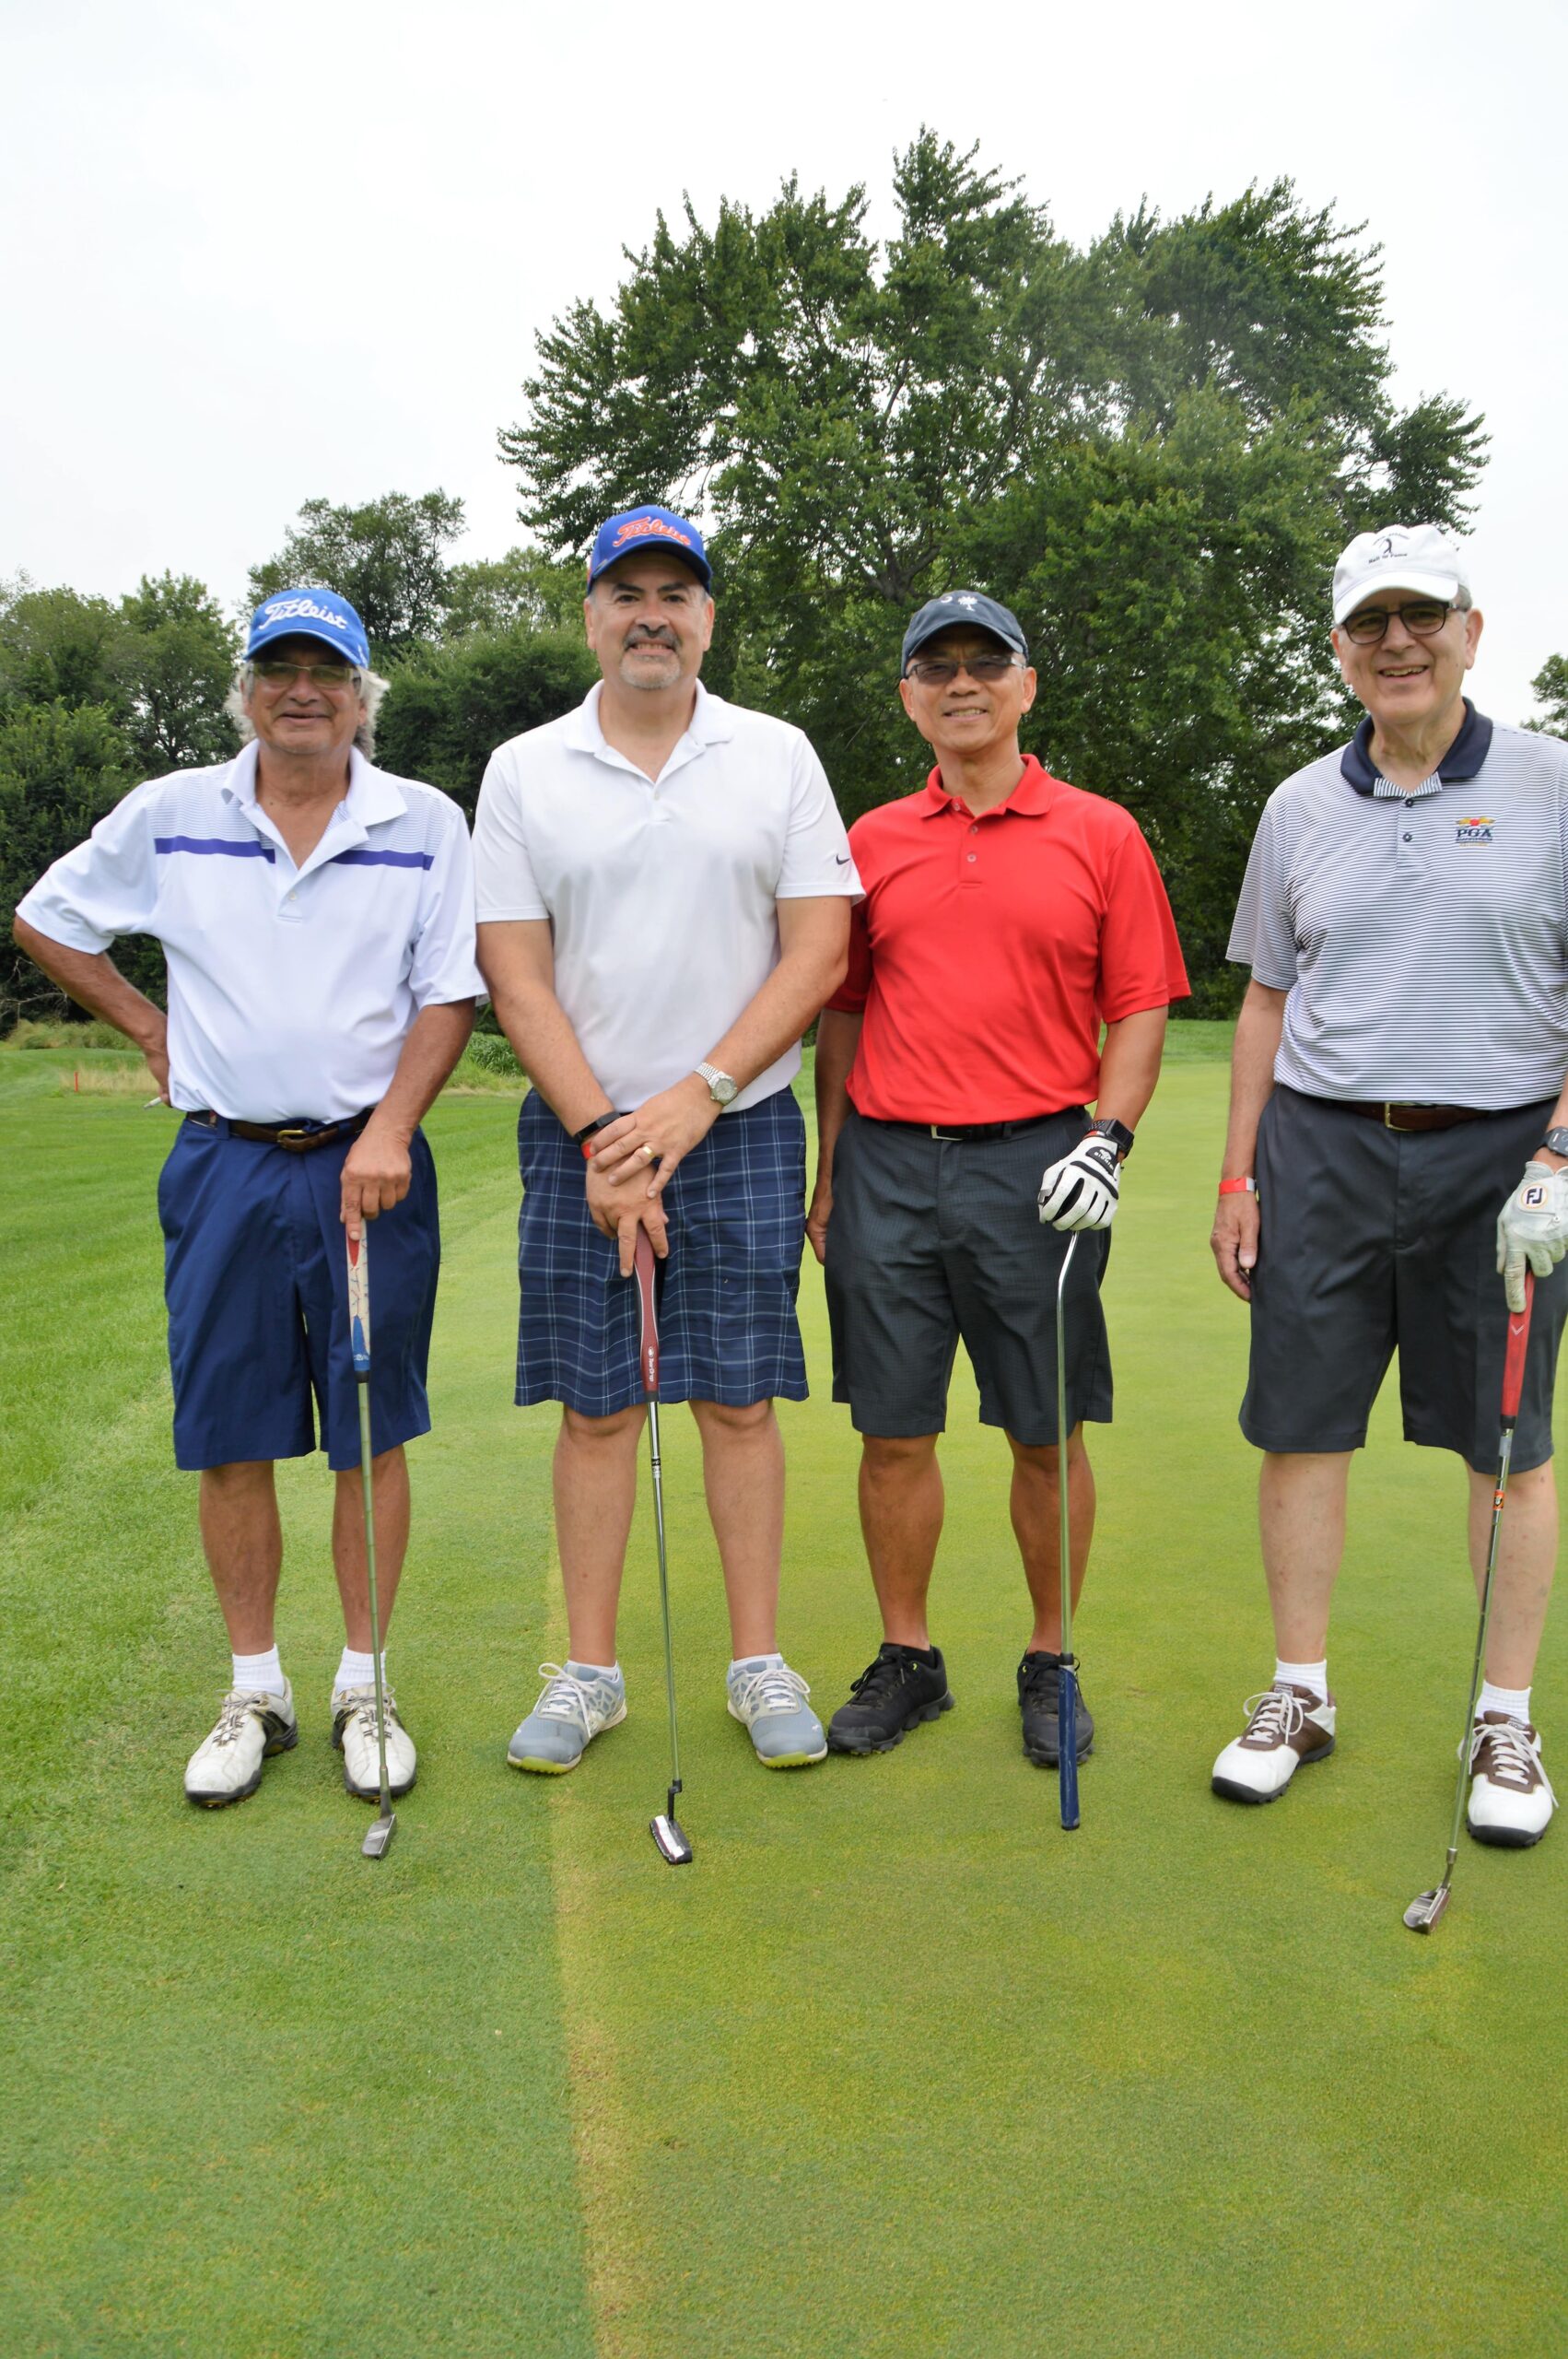 2018 GOLF OUTING – 150